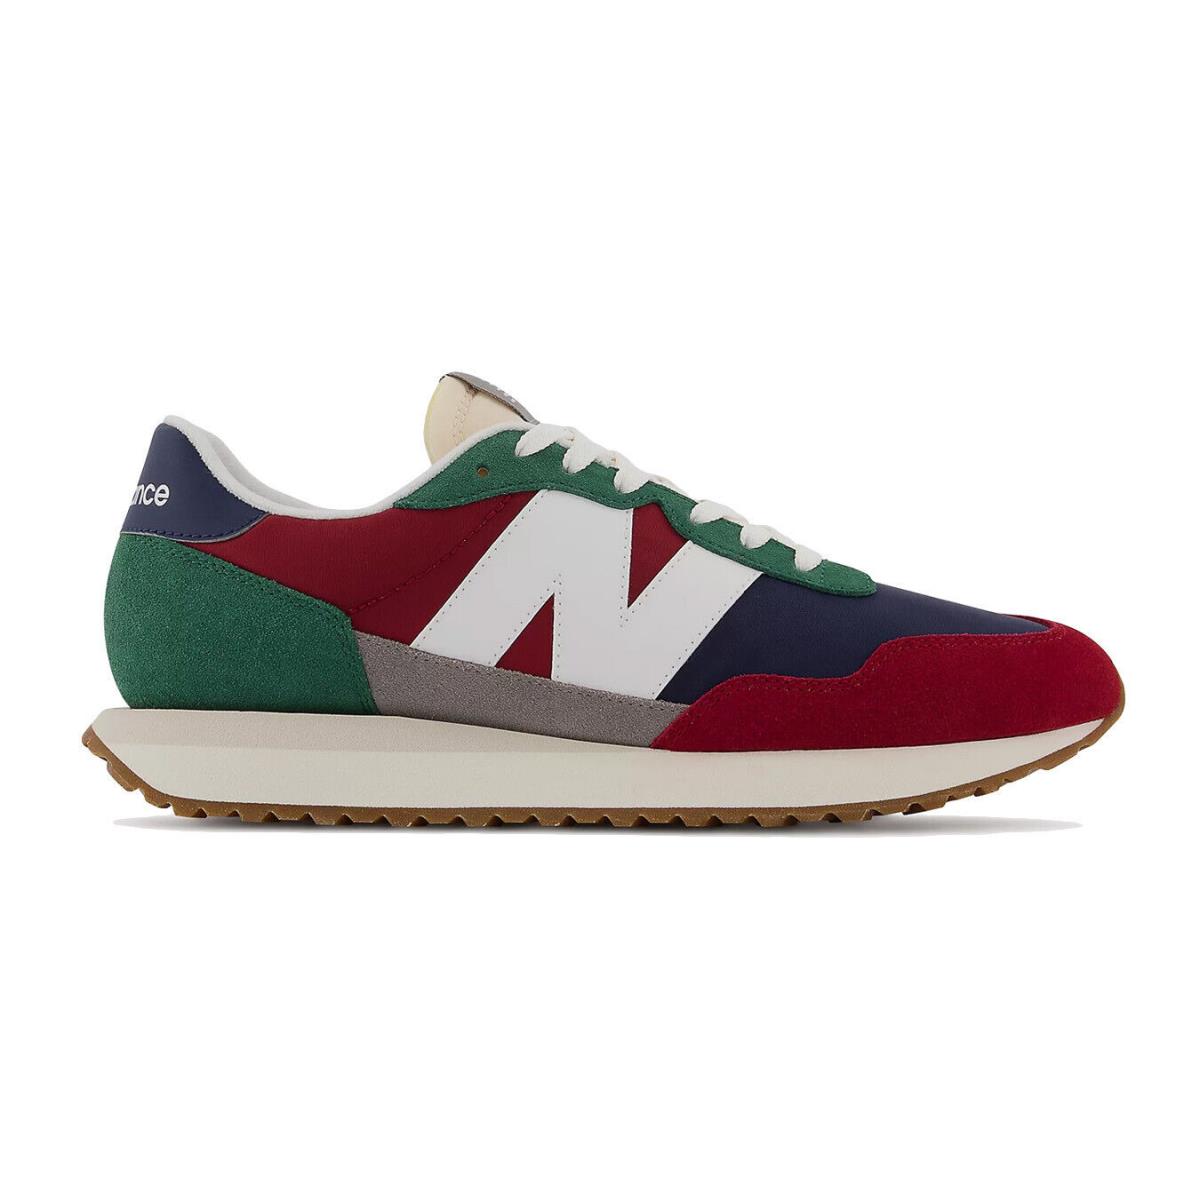 New Balance shoes  - Red/Green/Navy Blue 6